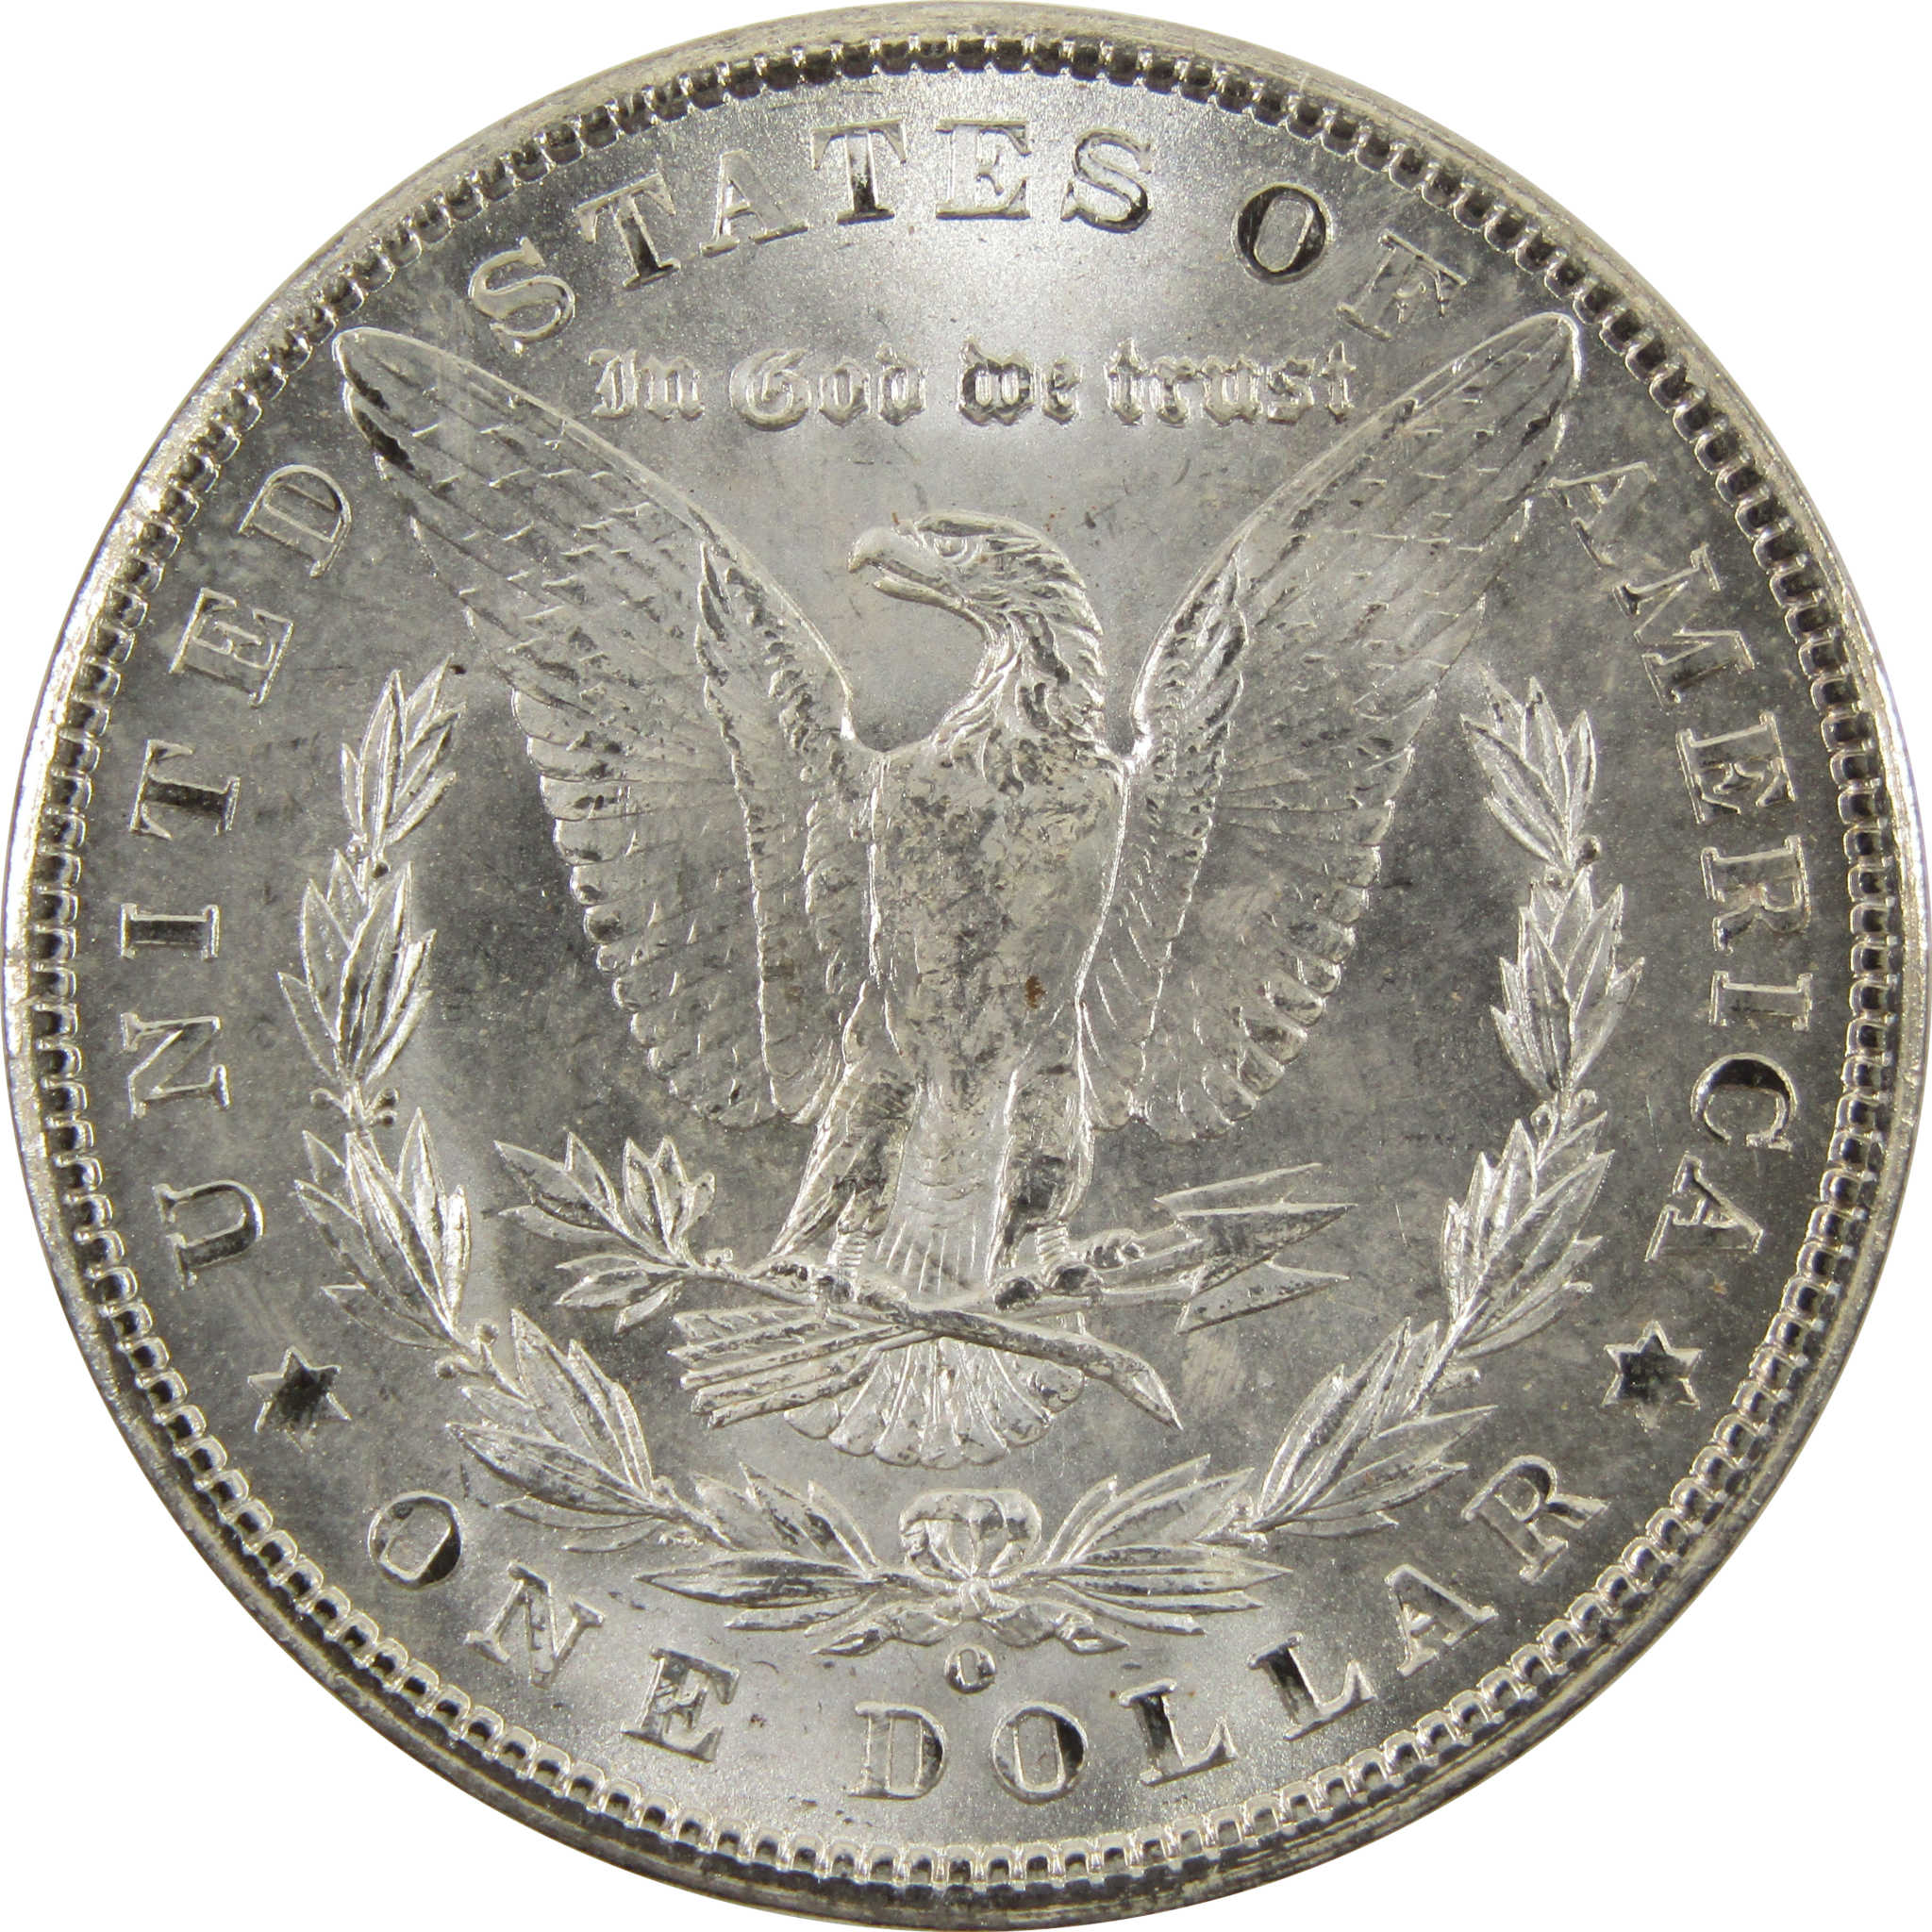 1901 O Morgan Dollar Uncirculated Details 90% Silver $1 SKU:I10469 - Morgan coin - Morgan silver dollar - Morgan silver dollar for sale - Profile Coins &amp; Collectibles